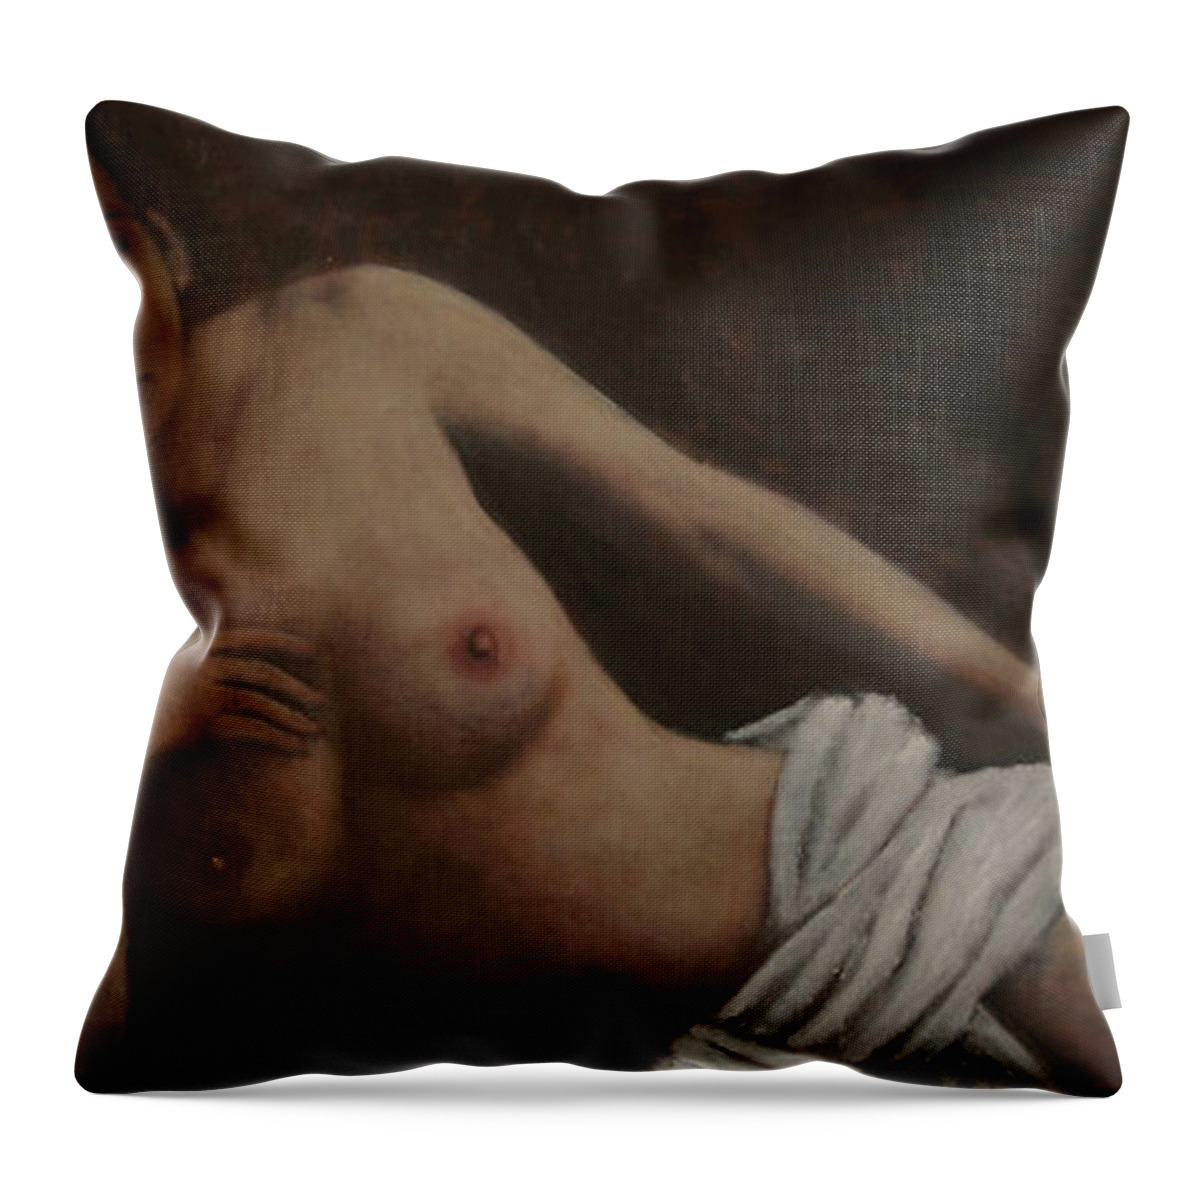 Beautiful Throw Pillow featuring the painting Enigmatic Model by Jarmo Korhonen aka Jarko